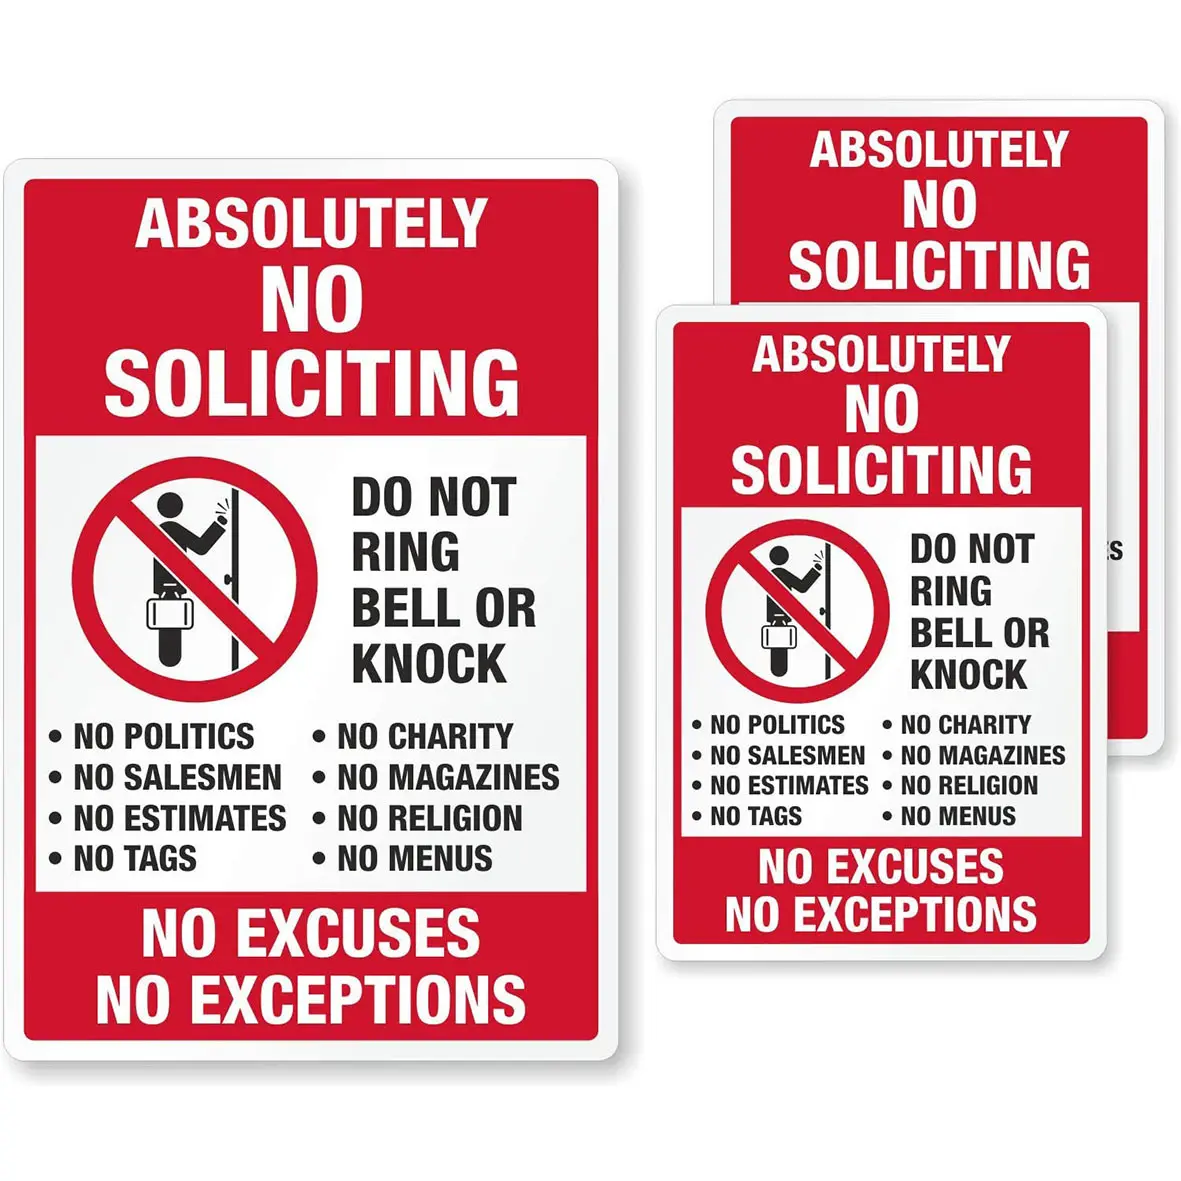 Pack of 3 No Excuses No Exceptions Do Not Ring Bell Knock Decals Set Absolutely No Soliciting Stickers